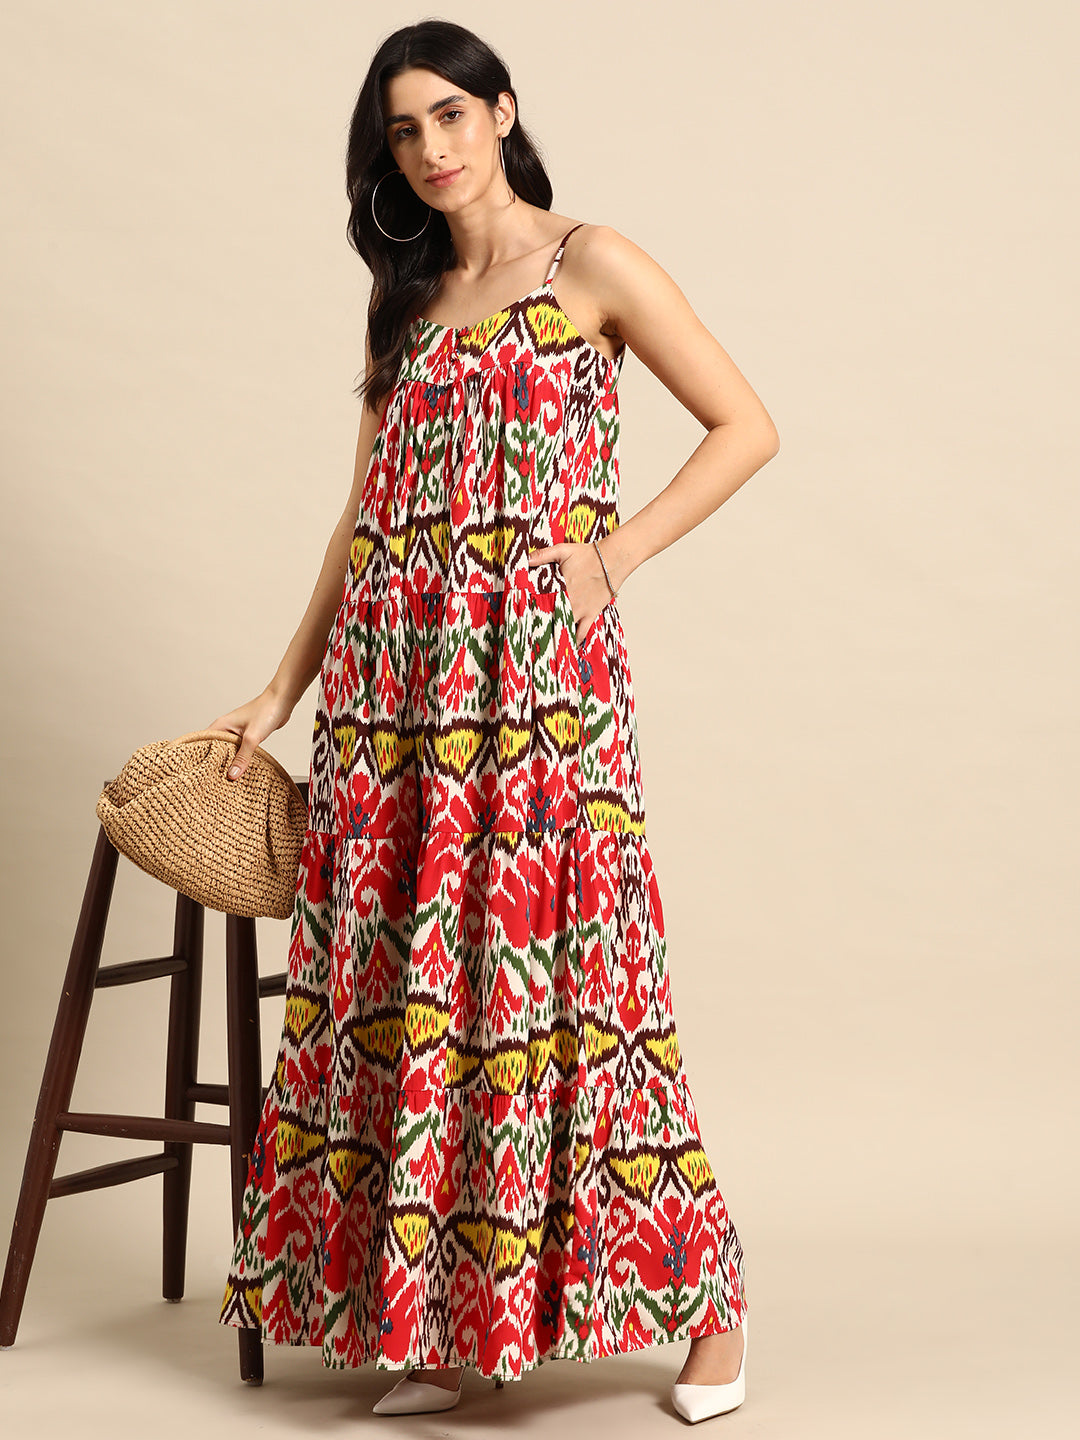 Tiered maxi Dress in Red and Cream Ikkat Print